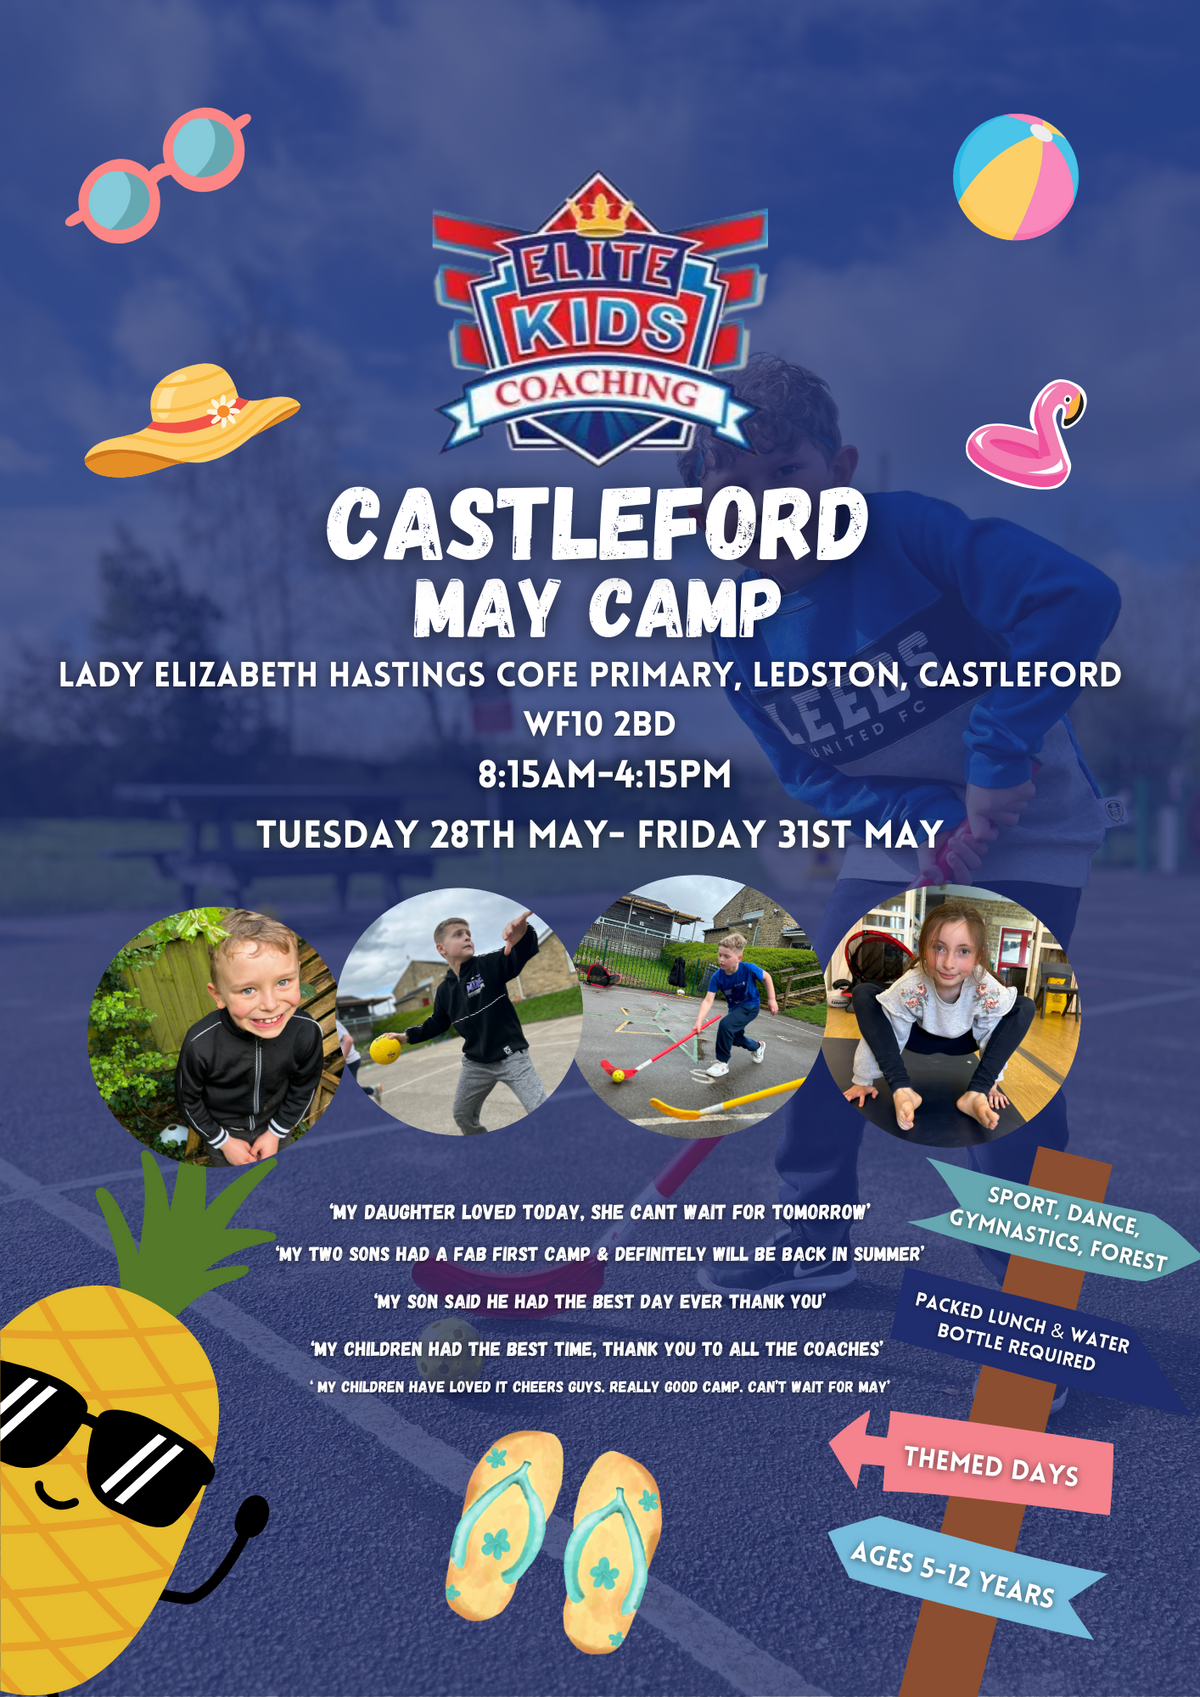 Castleford May Camp Wednesday 29th May